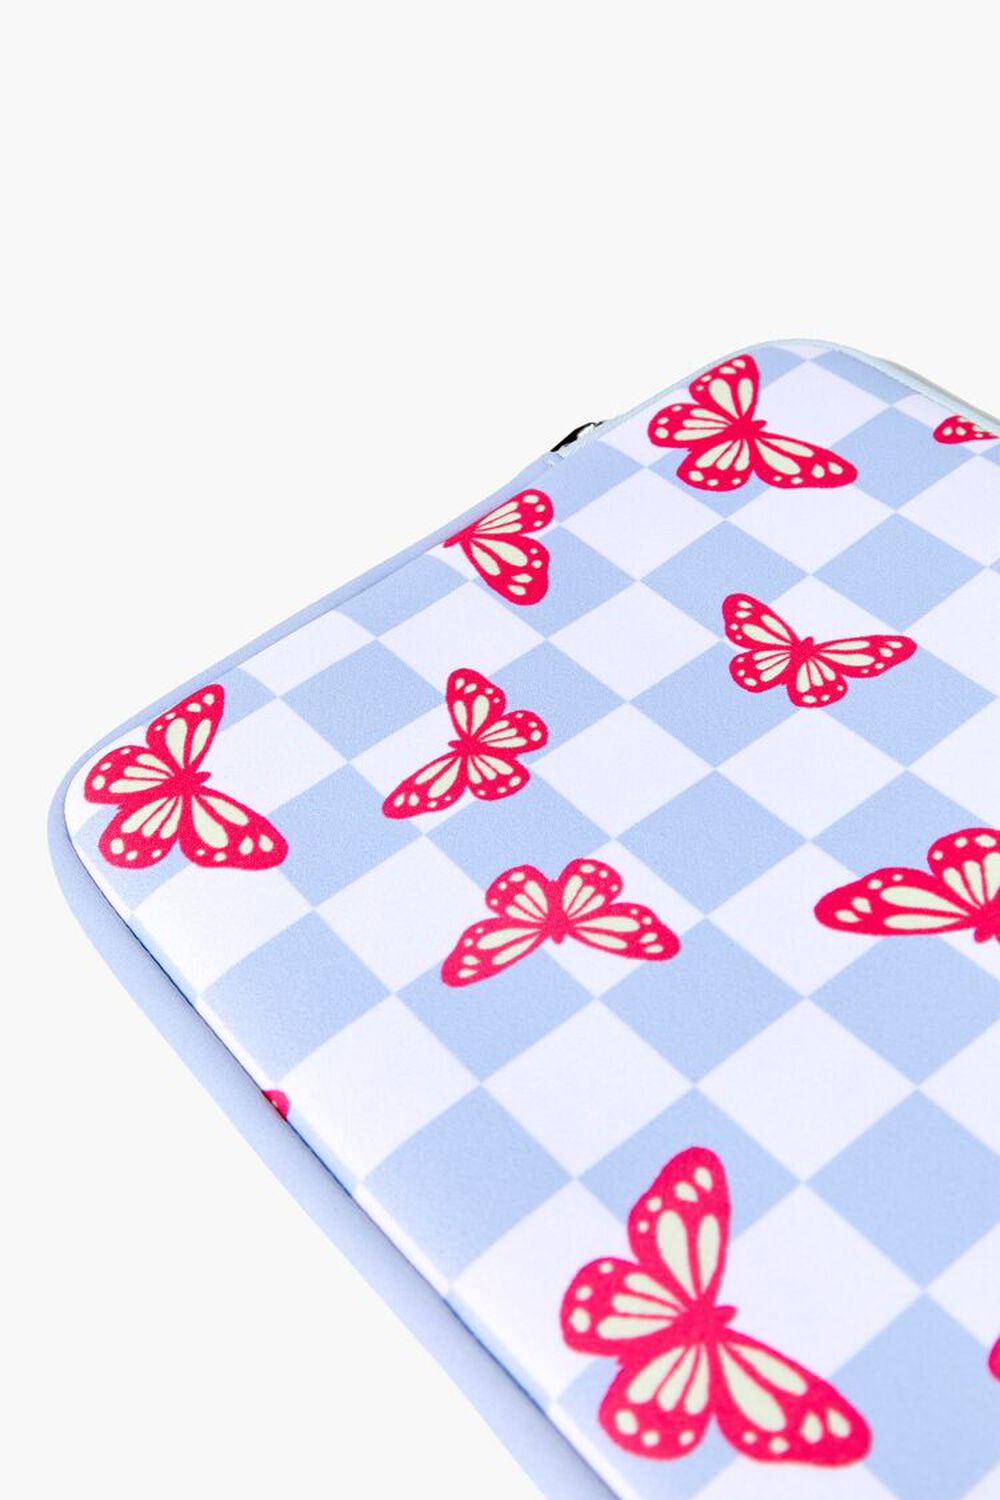 WHITE/MULTI Butterfly Checkered Tablet Case, image 3